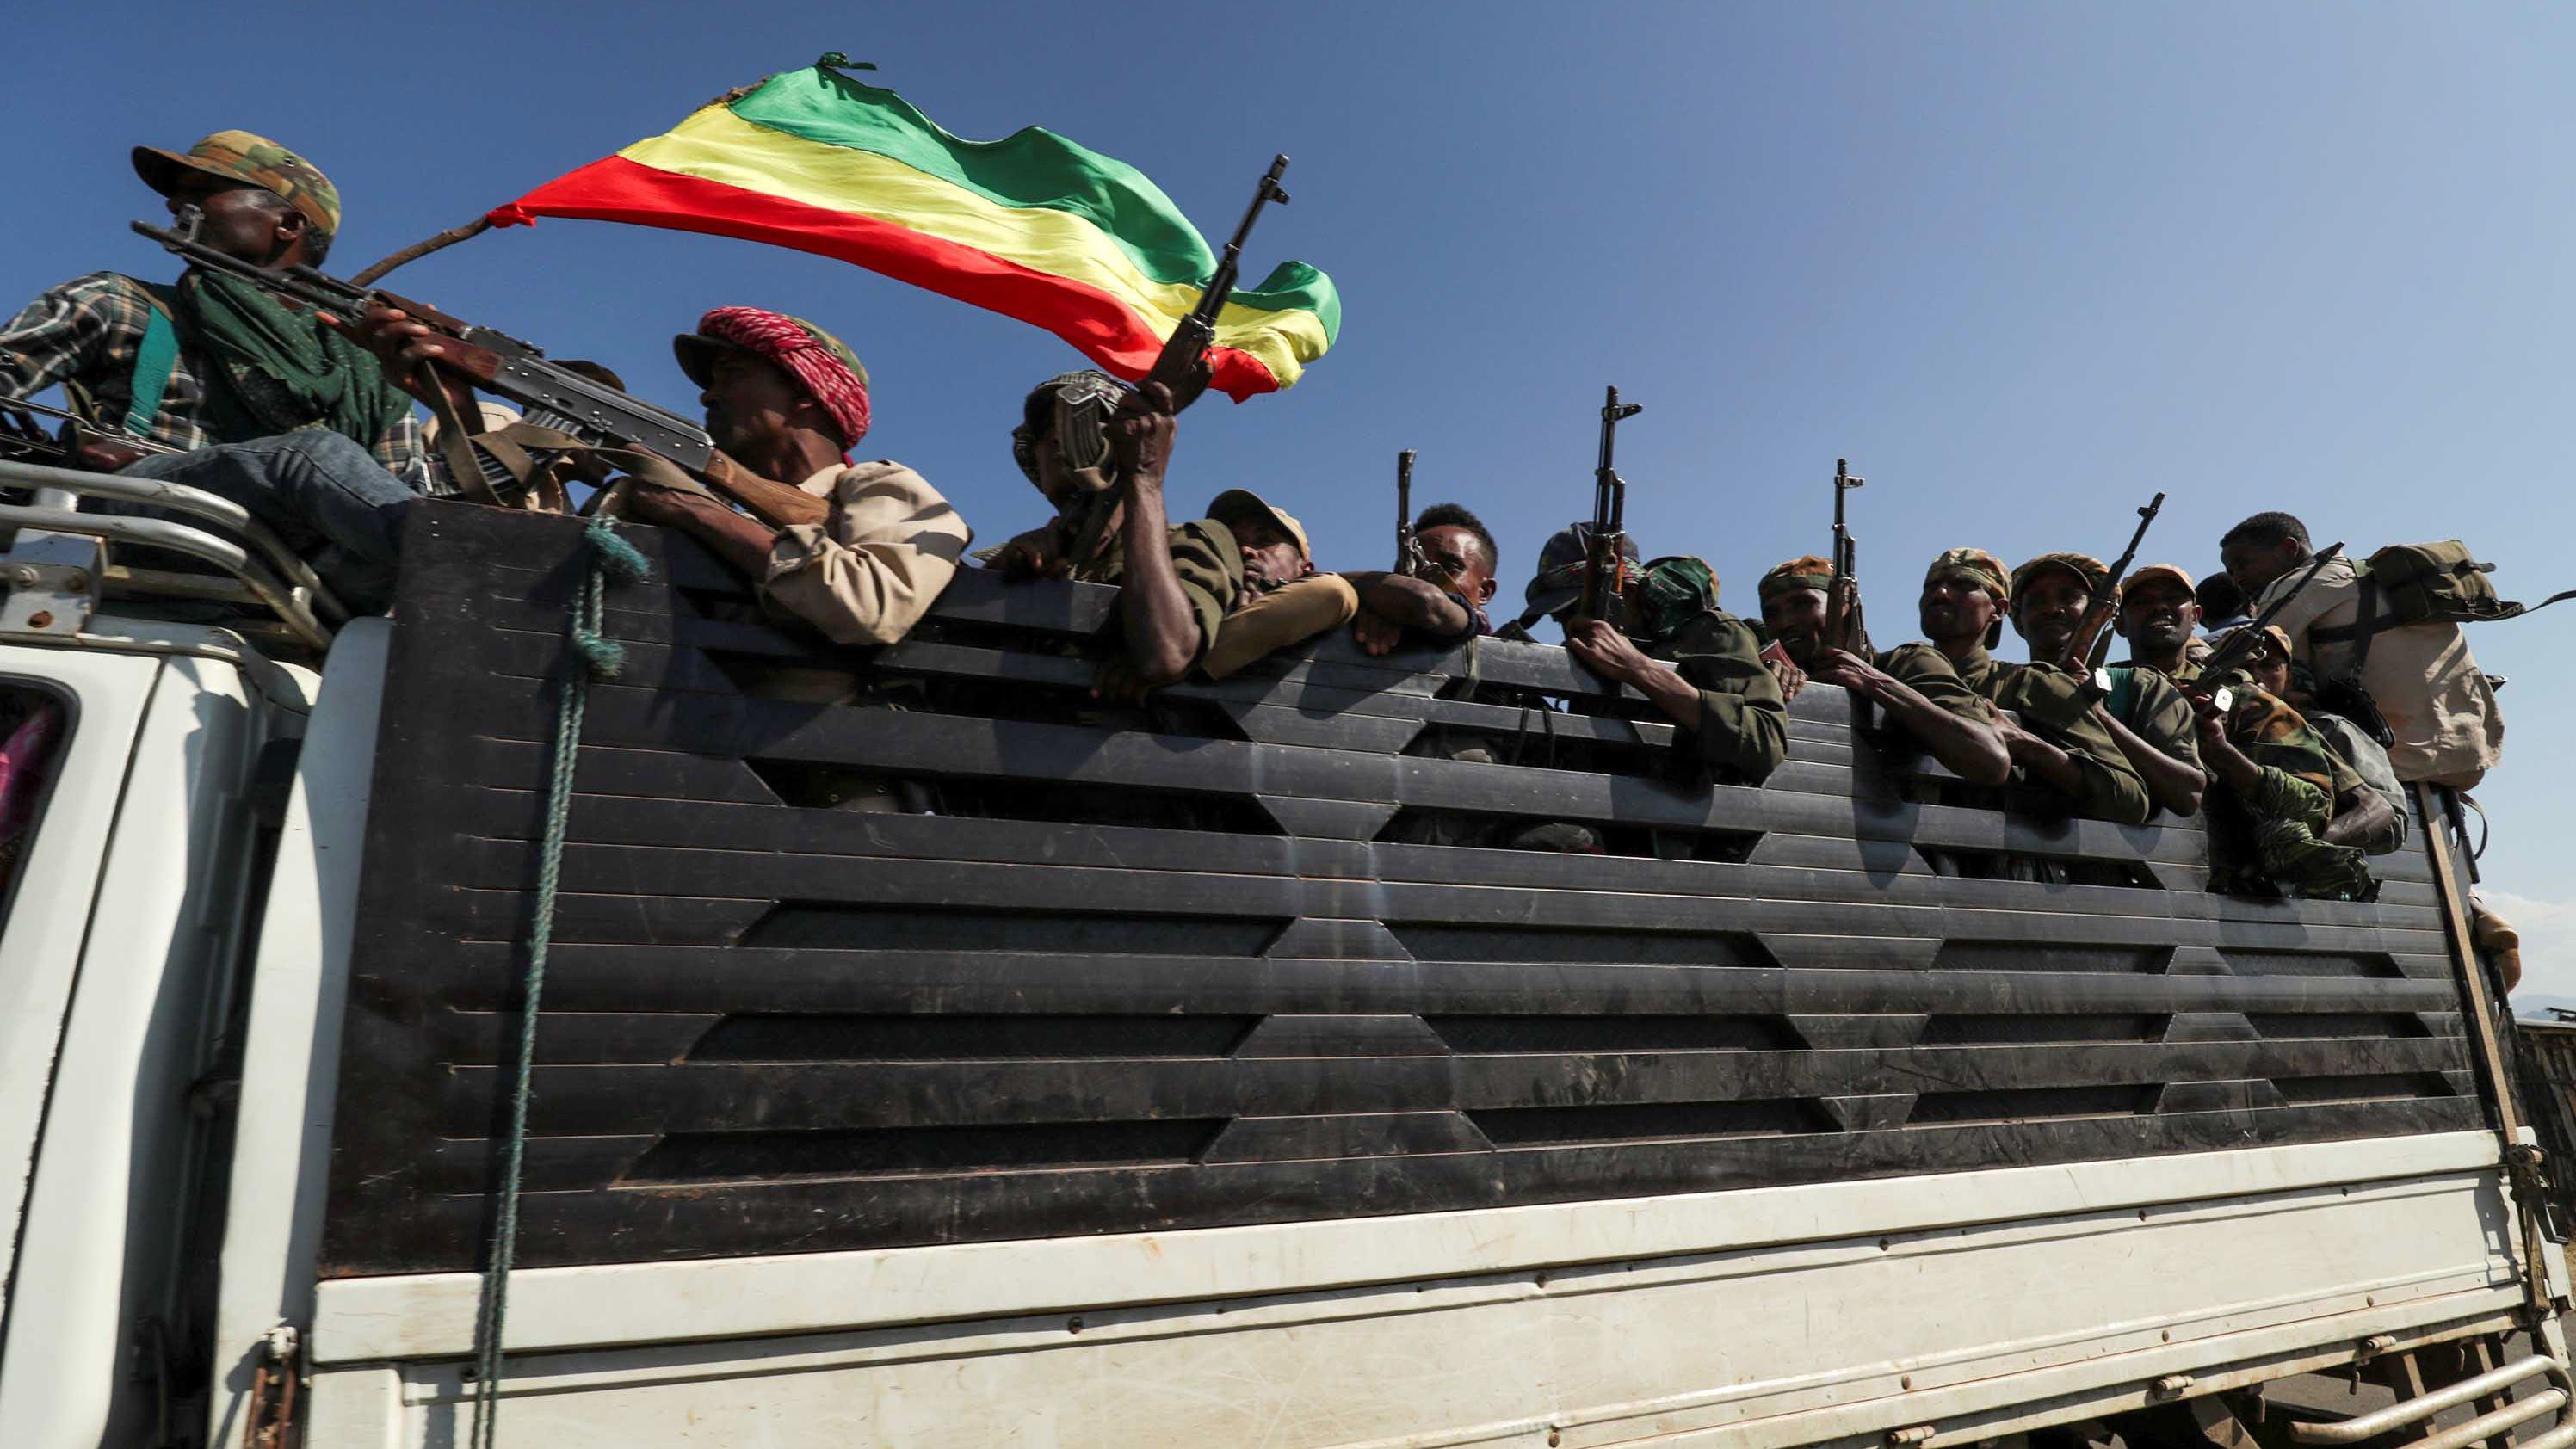 Members of Amhara region militias as they head to face the Tigray People's Liberation Front, in Sanja, Amhara region.